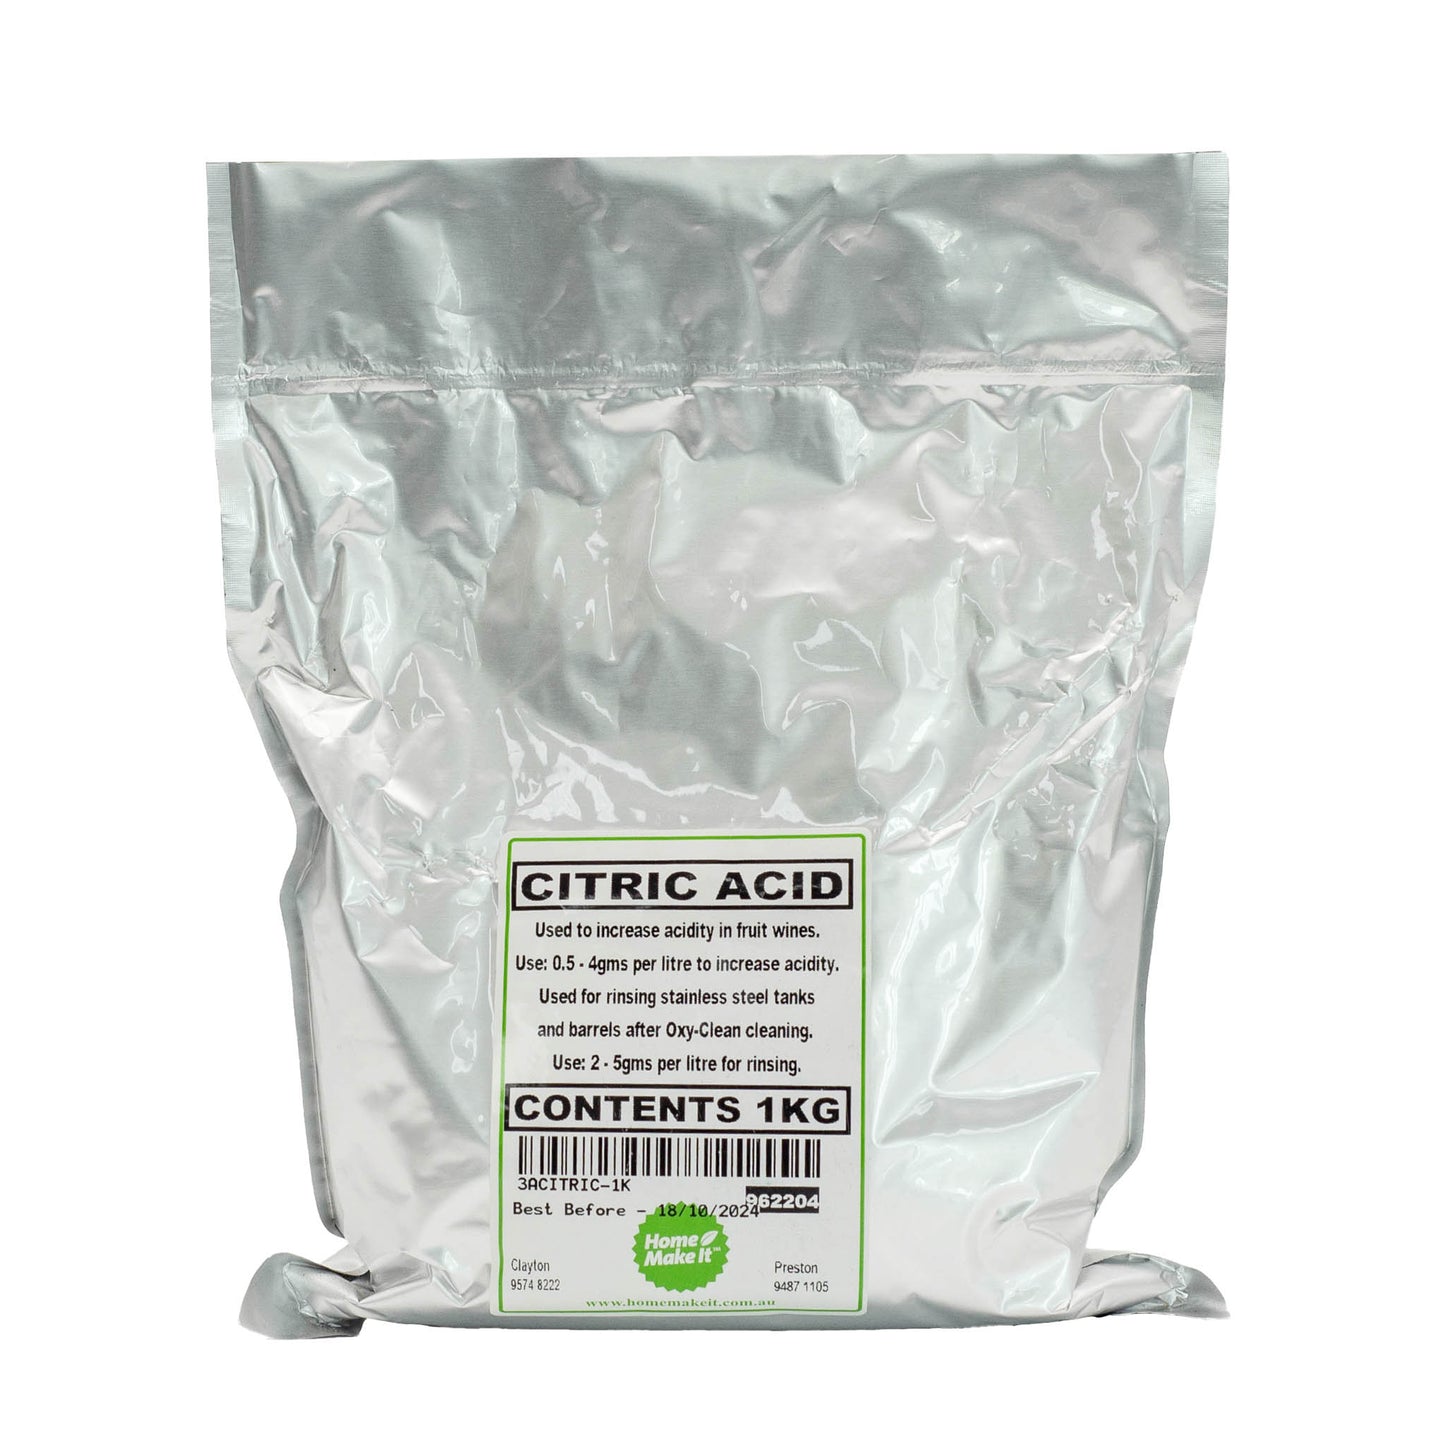 Citric Acid 1 kg. Used for increasing acidity in wines and rinsing stainless steel tanks and barrels.